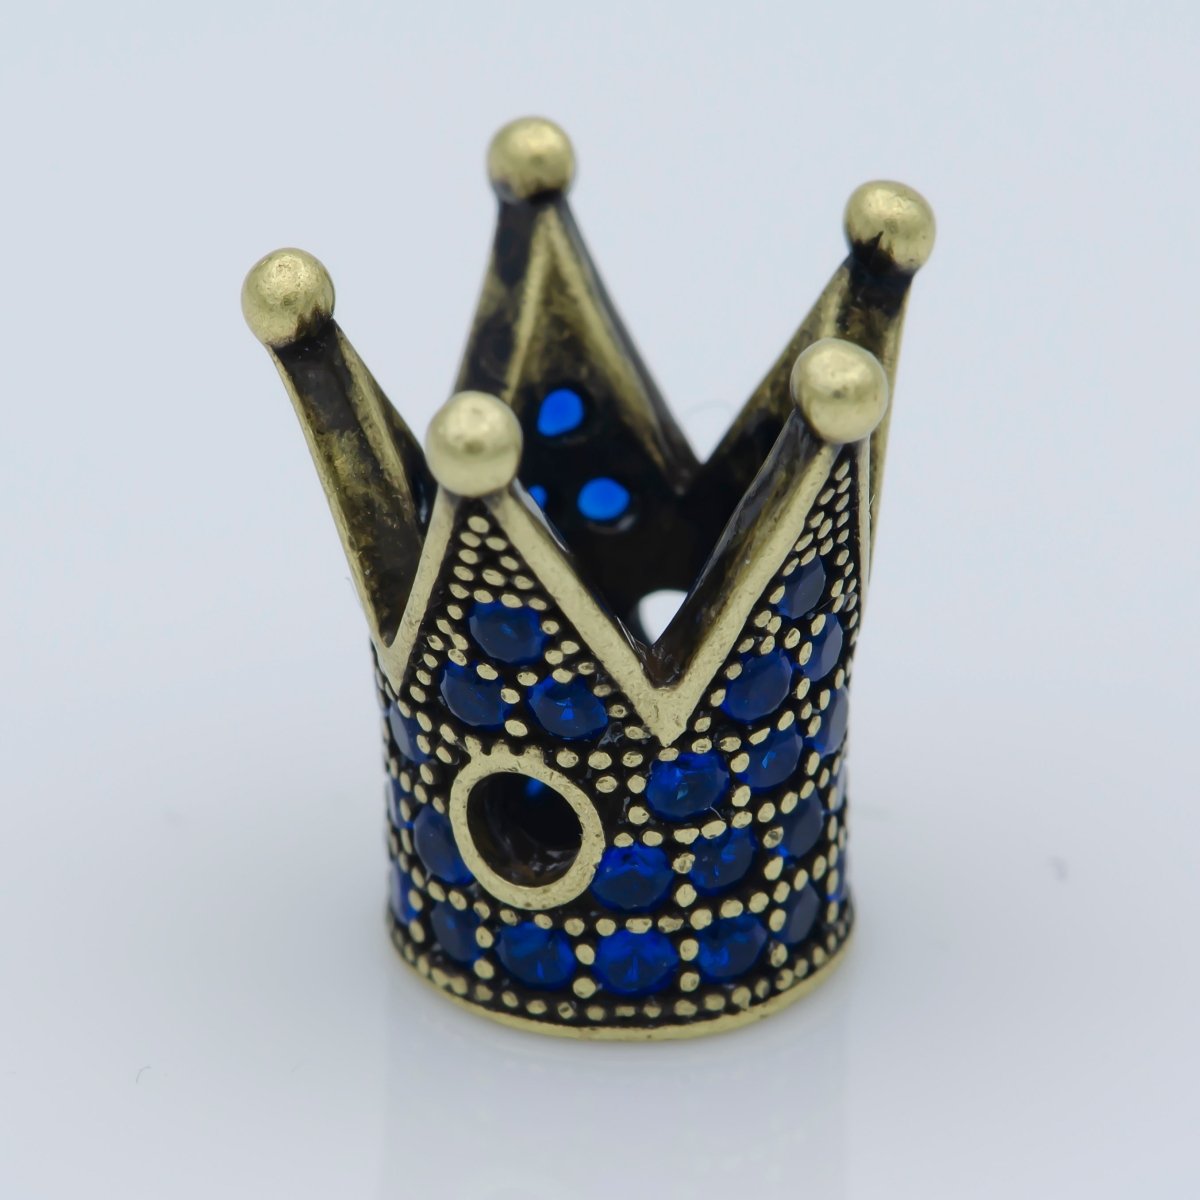 Dainty Crown Bead Spacer CZ Blue Crystal Small Simple King Crown Model Jewelry Making Beads B-579, B-580 - DLUXCA